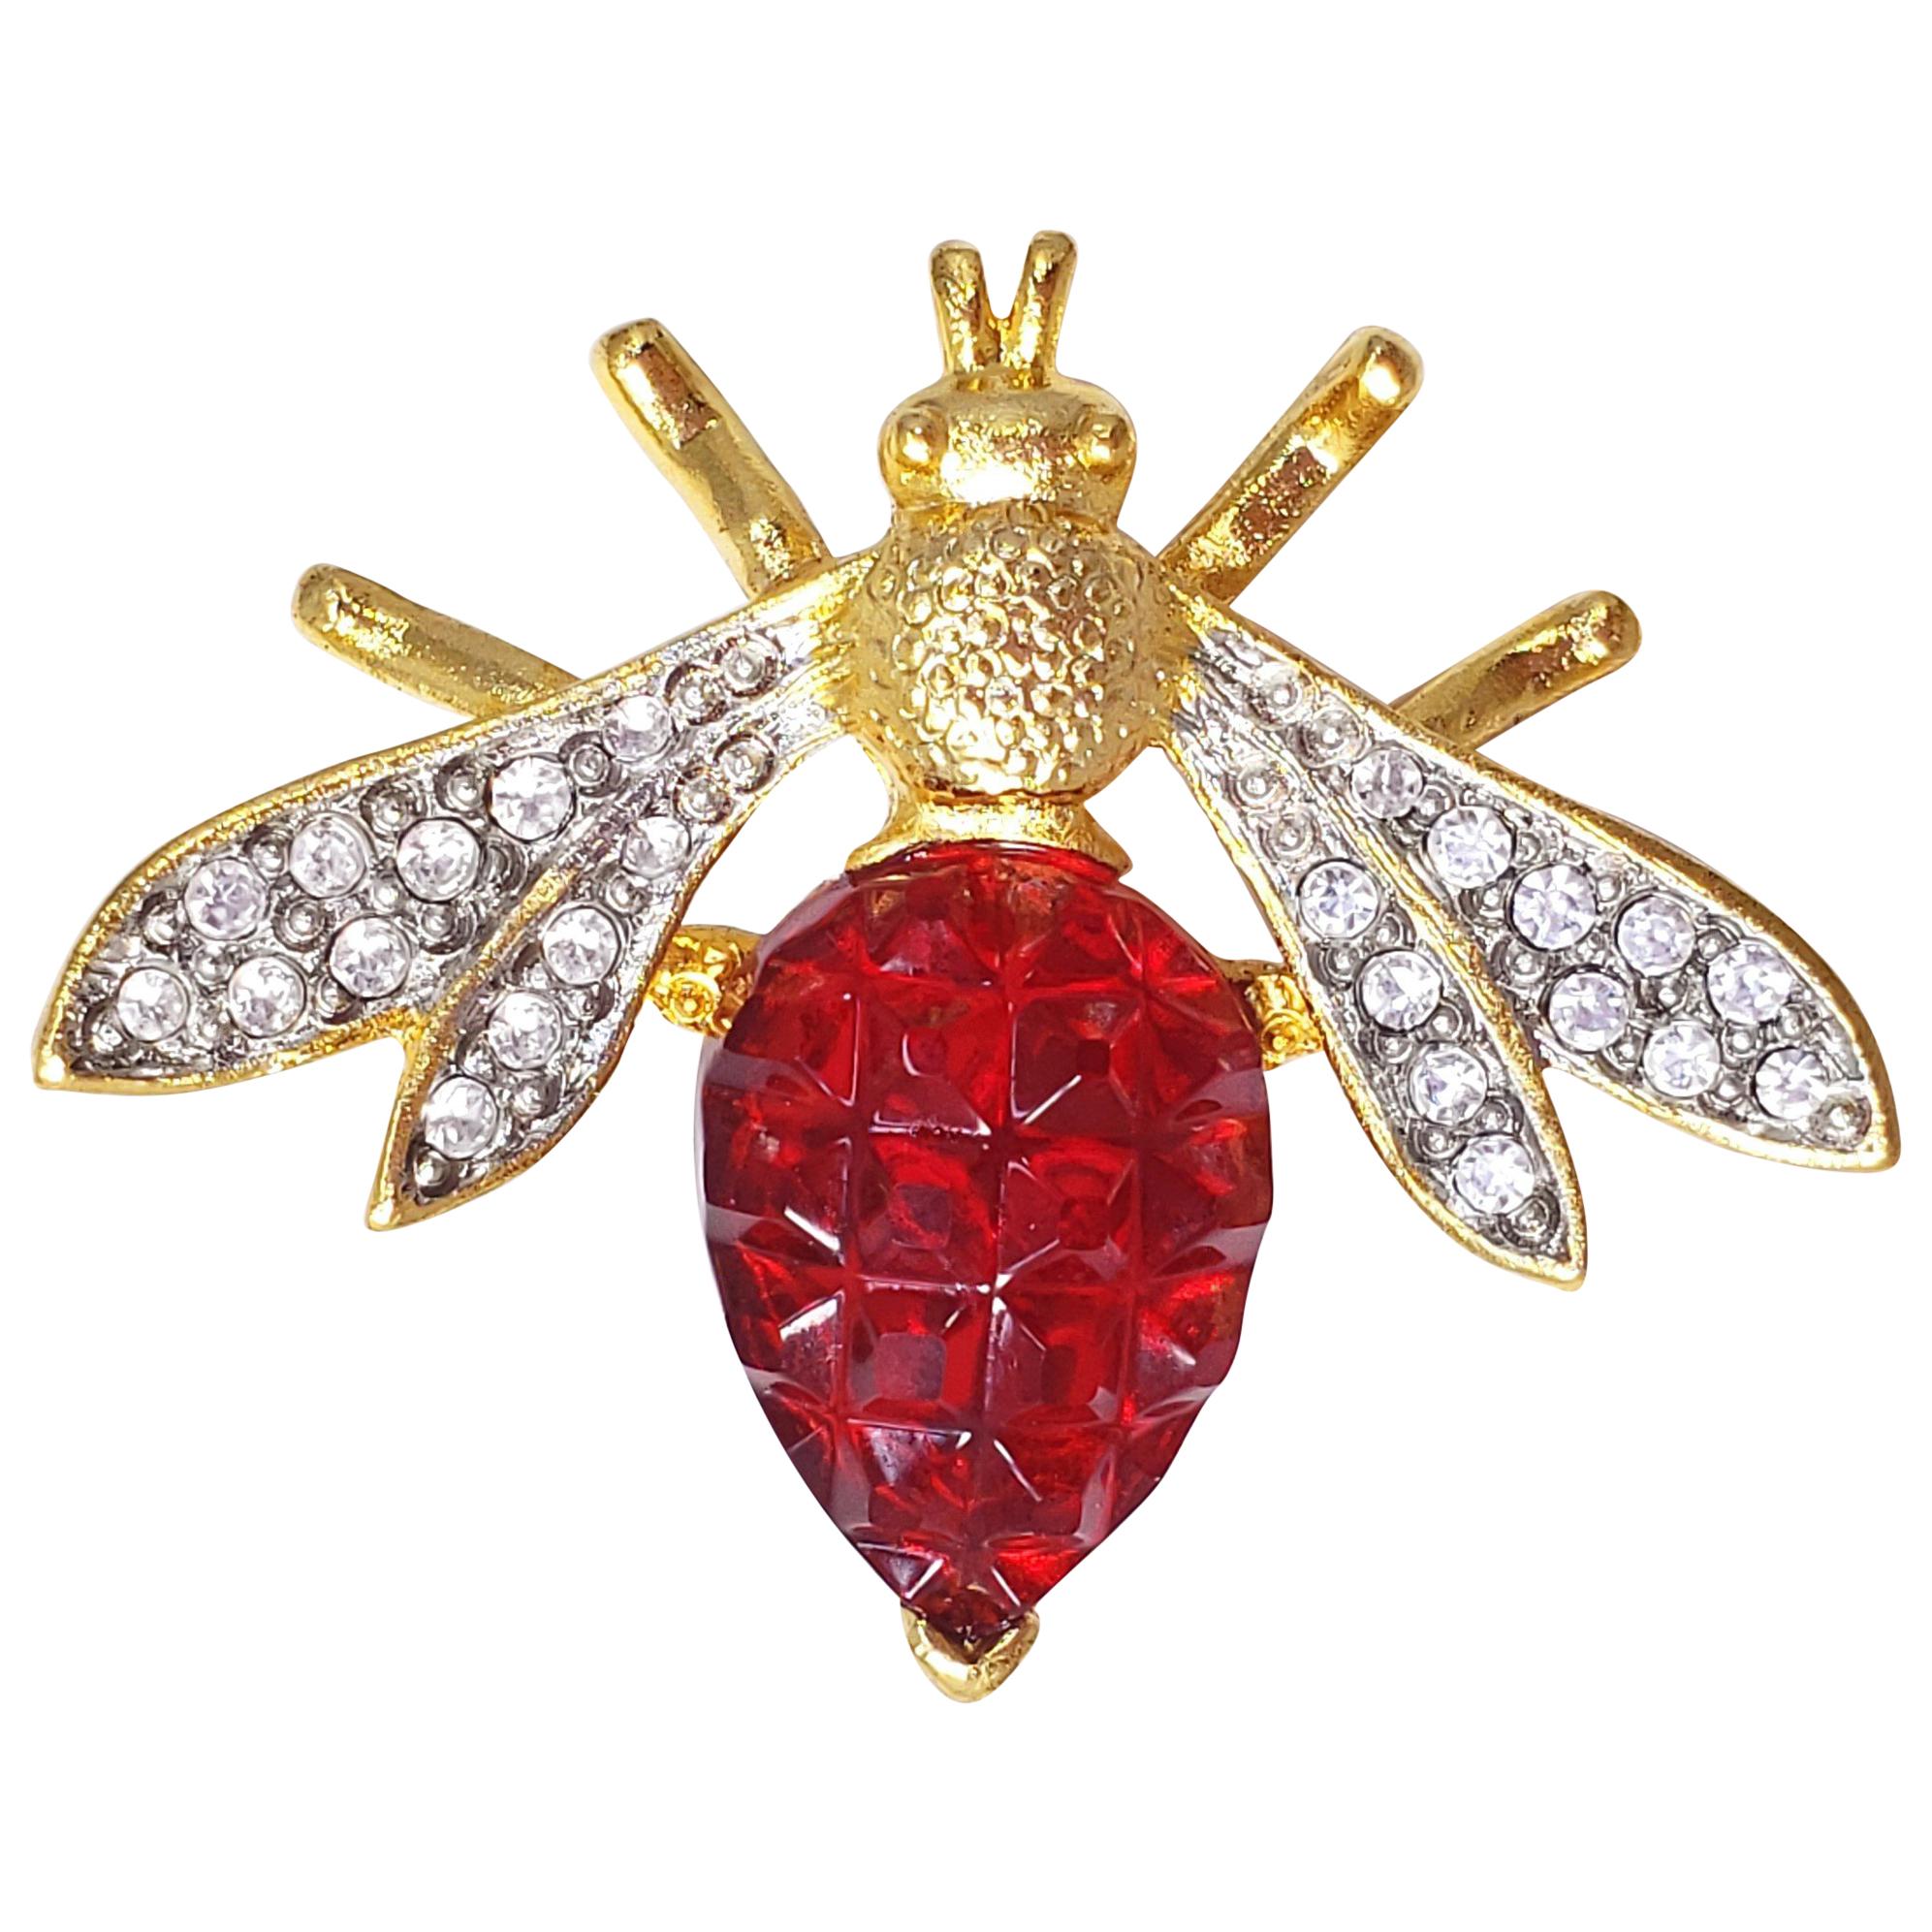 KJL Kenneth Jay Lane Wasp Fly Insect Pin Brooch w Faceted and Carved Crystals